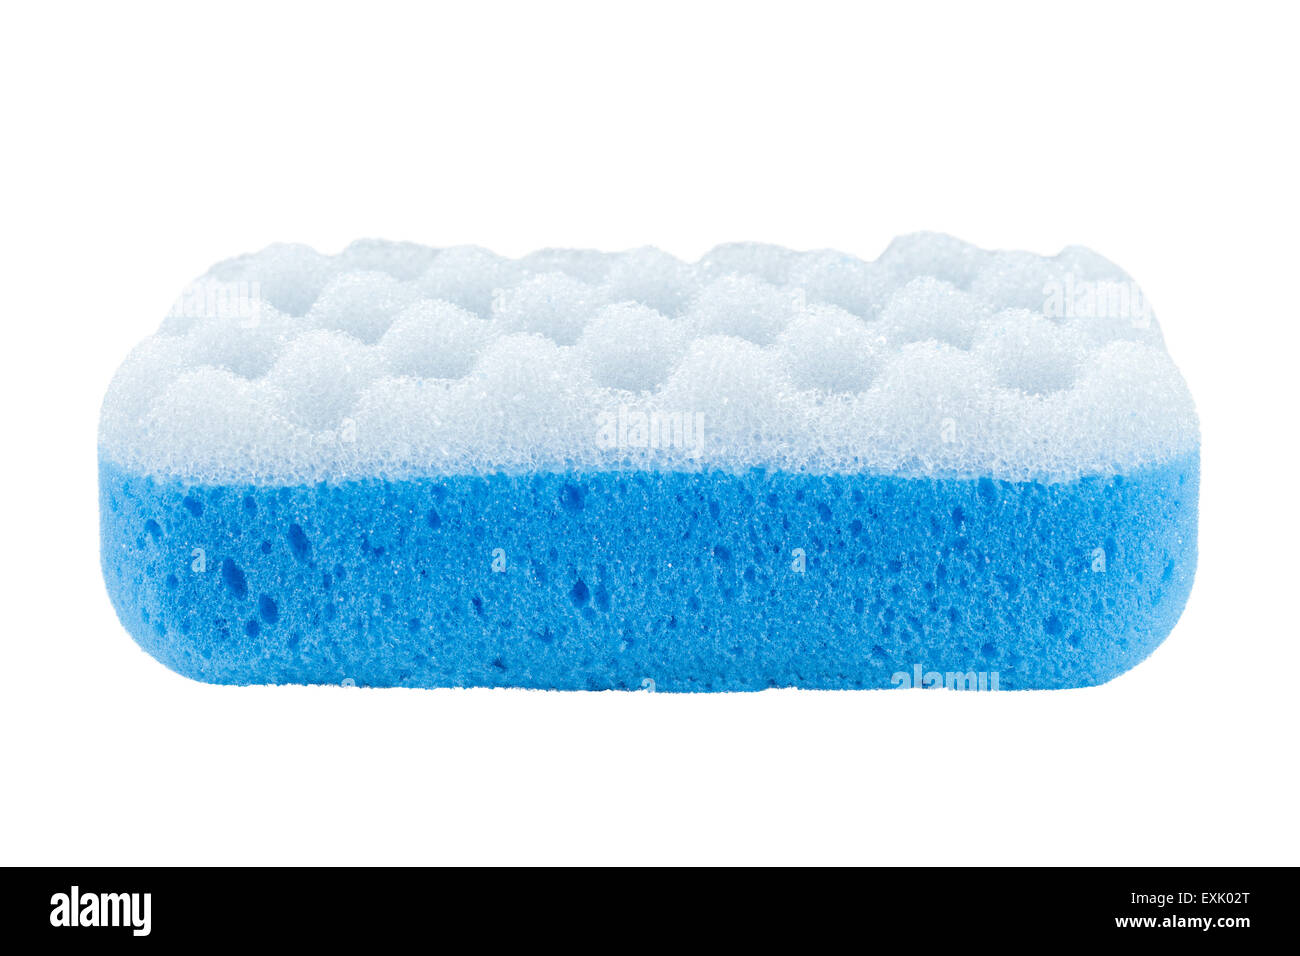 Side view of a blue bath sponge, isolated on white background Stock Photo